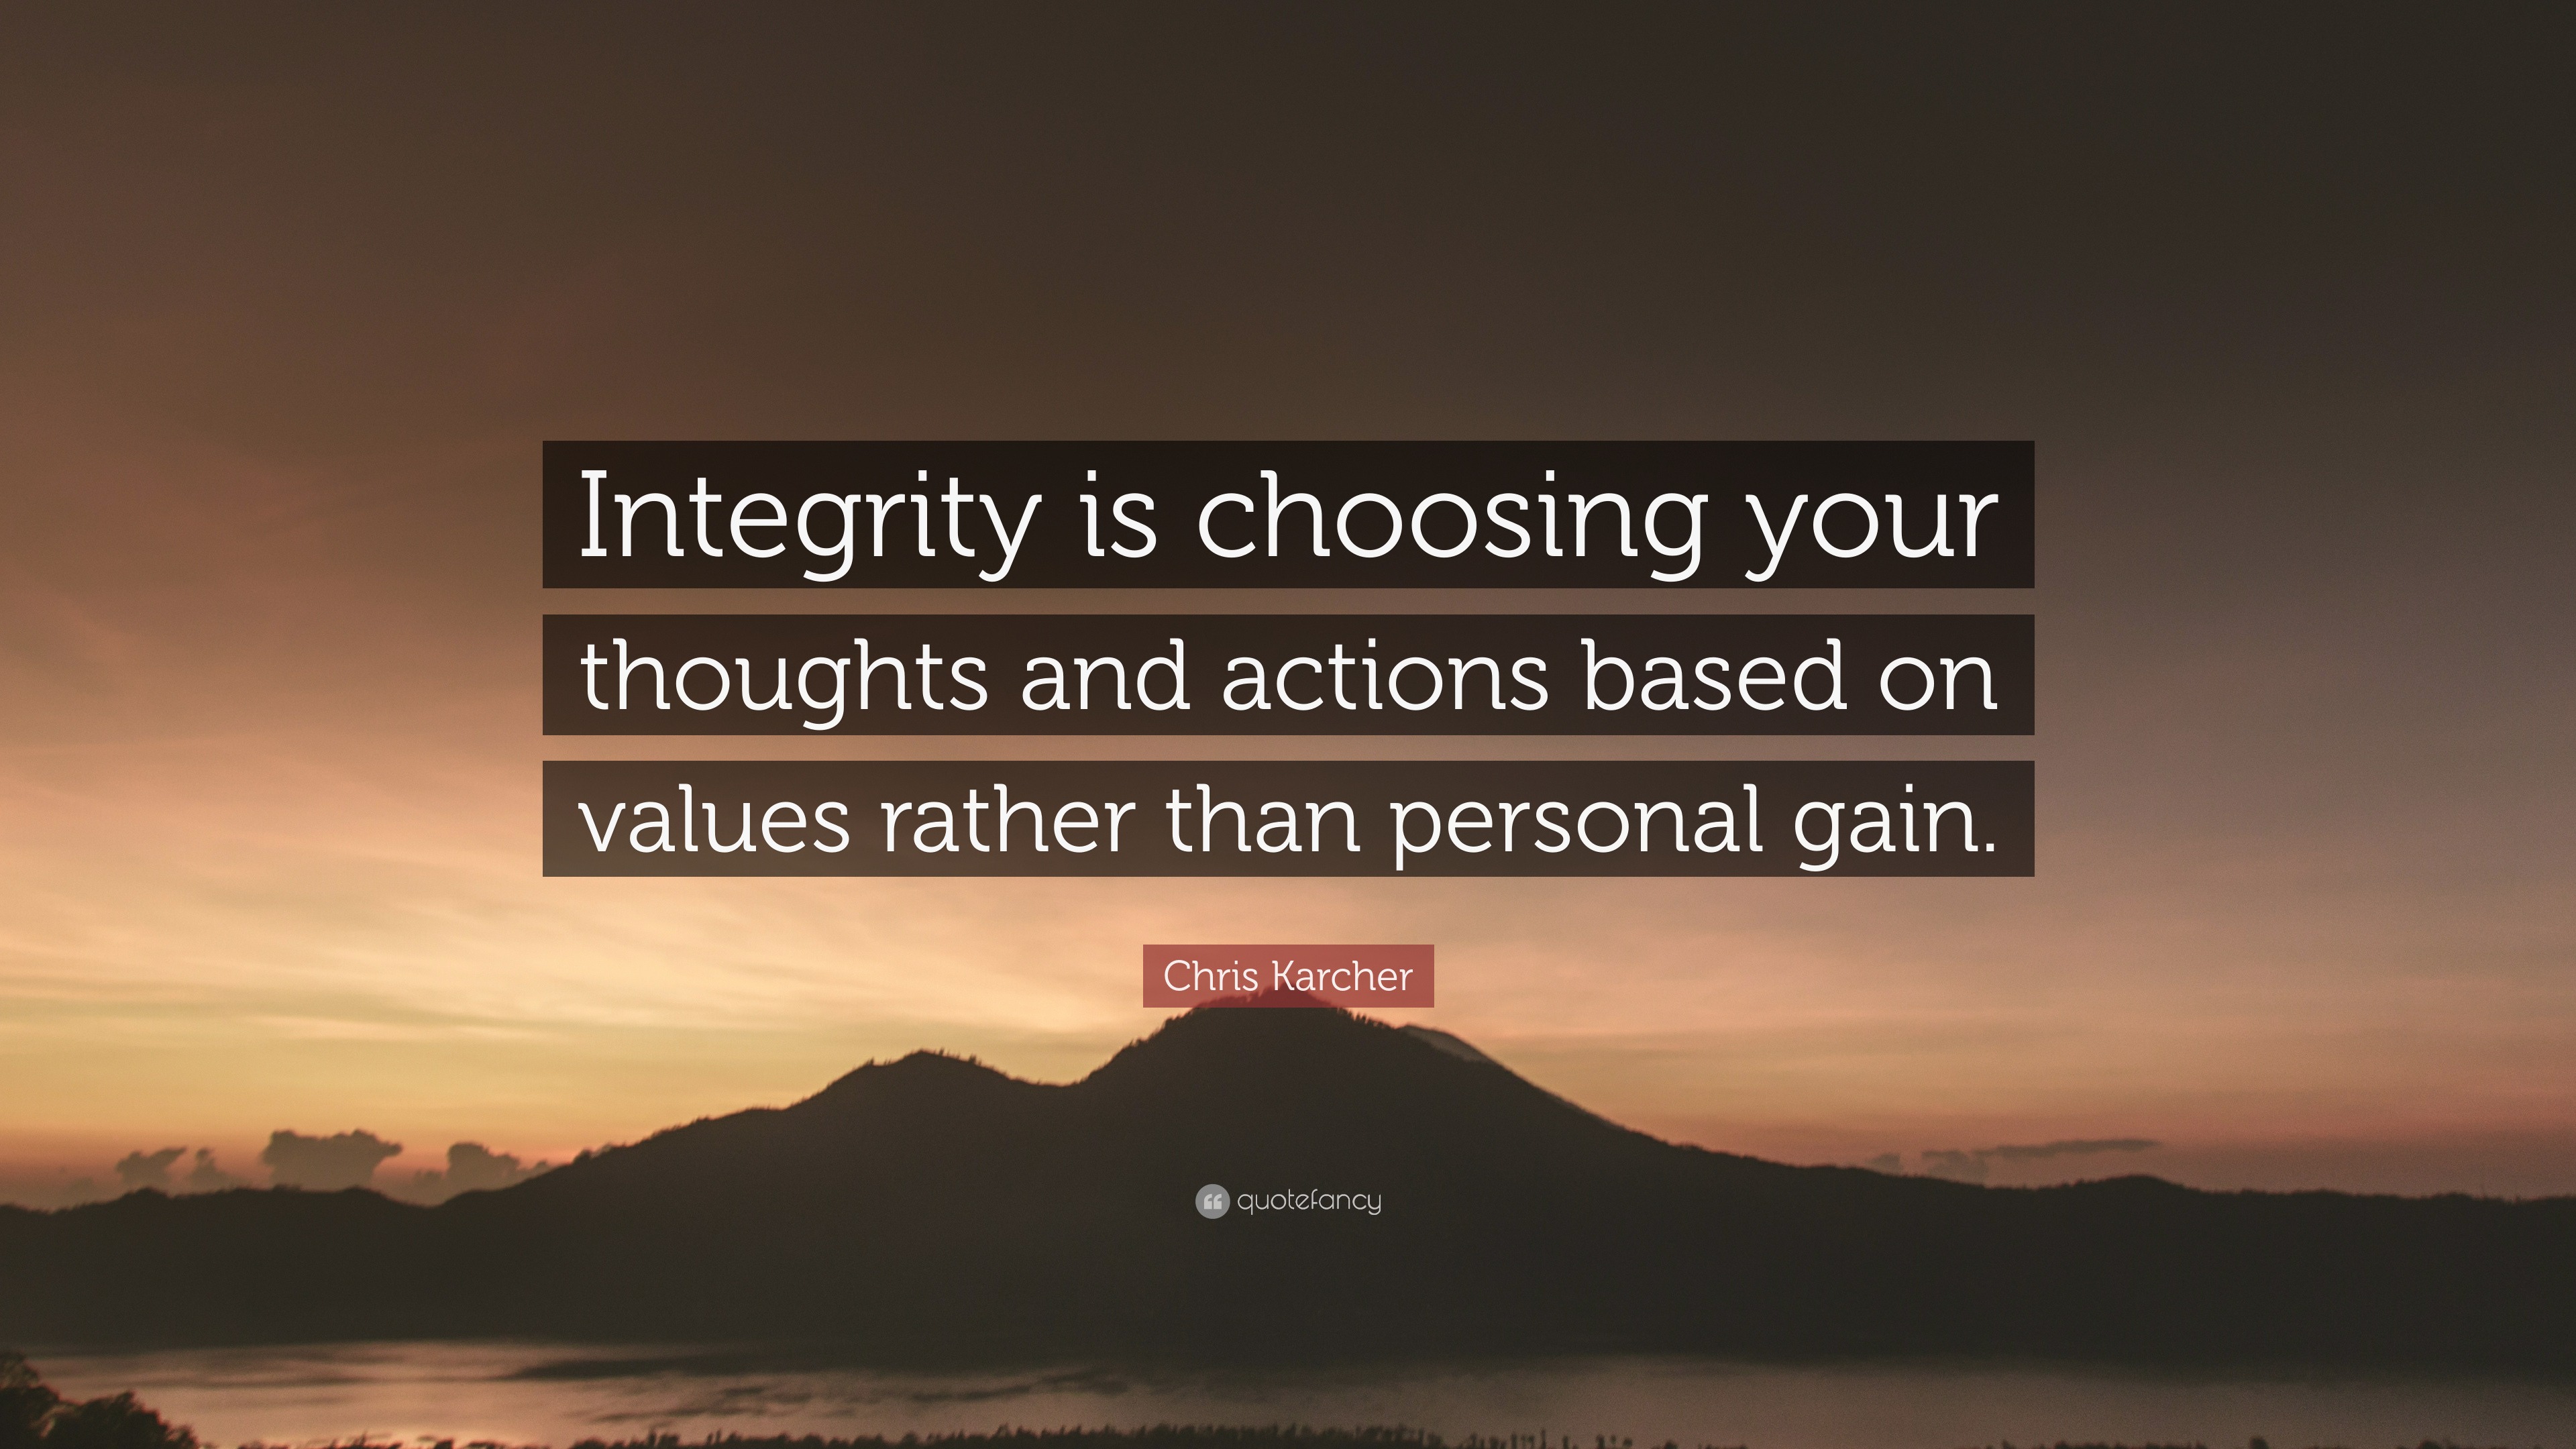 Chris Karcher Quote “Integrity is choosing your thoughts